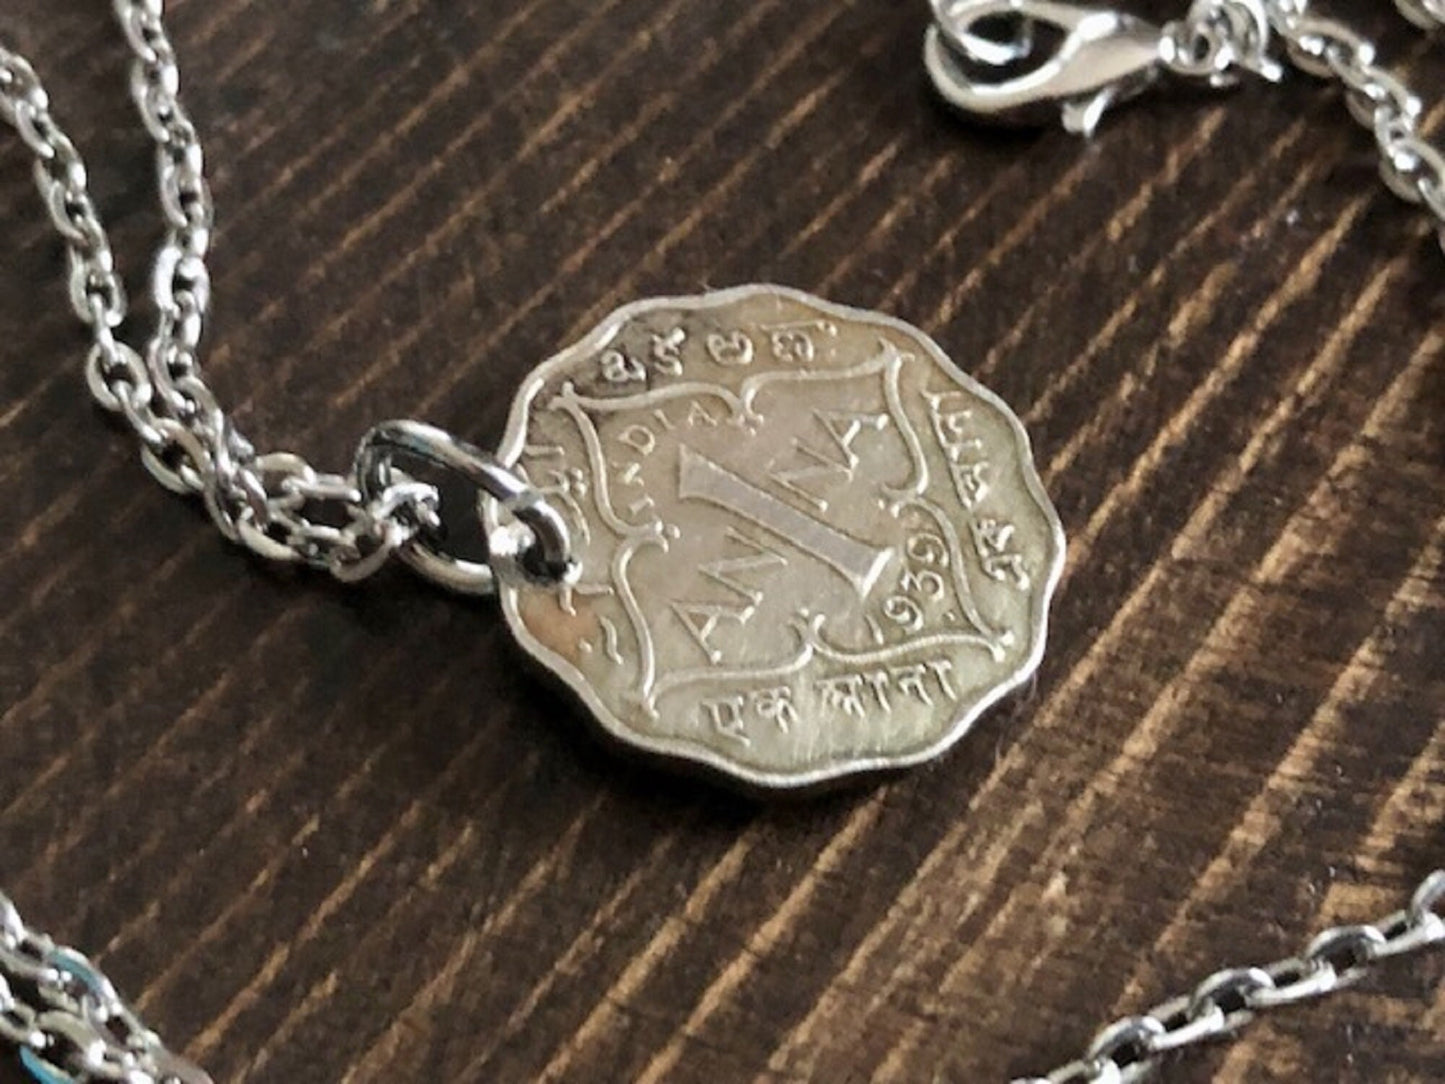 India Sri Lanka Coin Pendant 1 Anna Personal Necklace Old Vintage Handmade Jewelry Gift Friend Charm For Him Her World Coin Collector